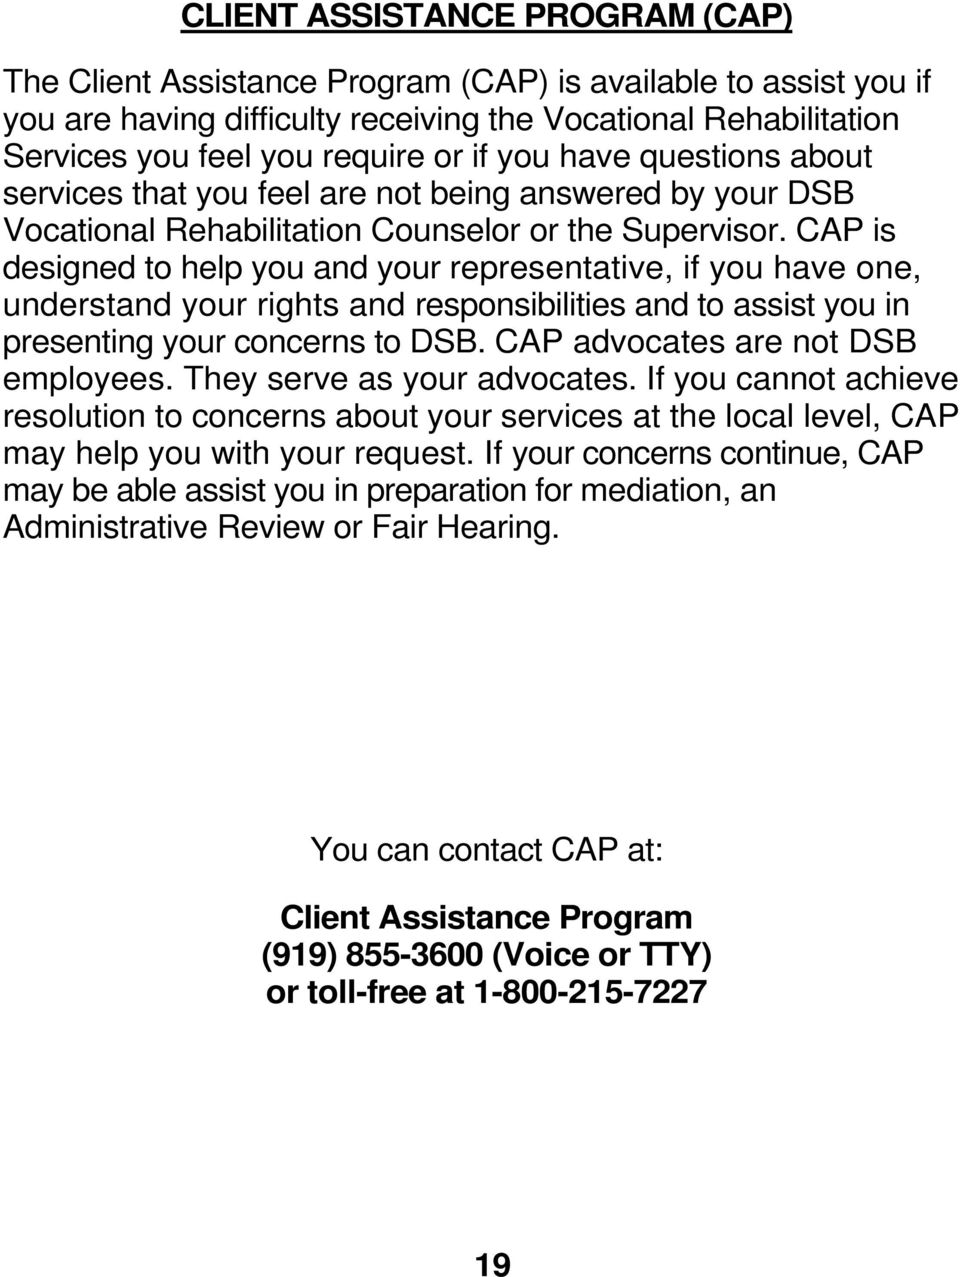 CAP is designed to help you and your representative, if you have one, understand your rights and responsibilities and to assist you in presenting your concerns to DSB.